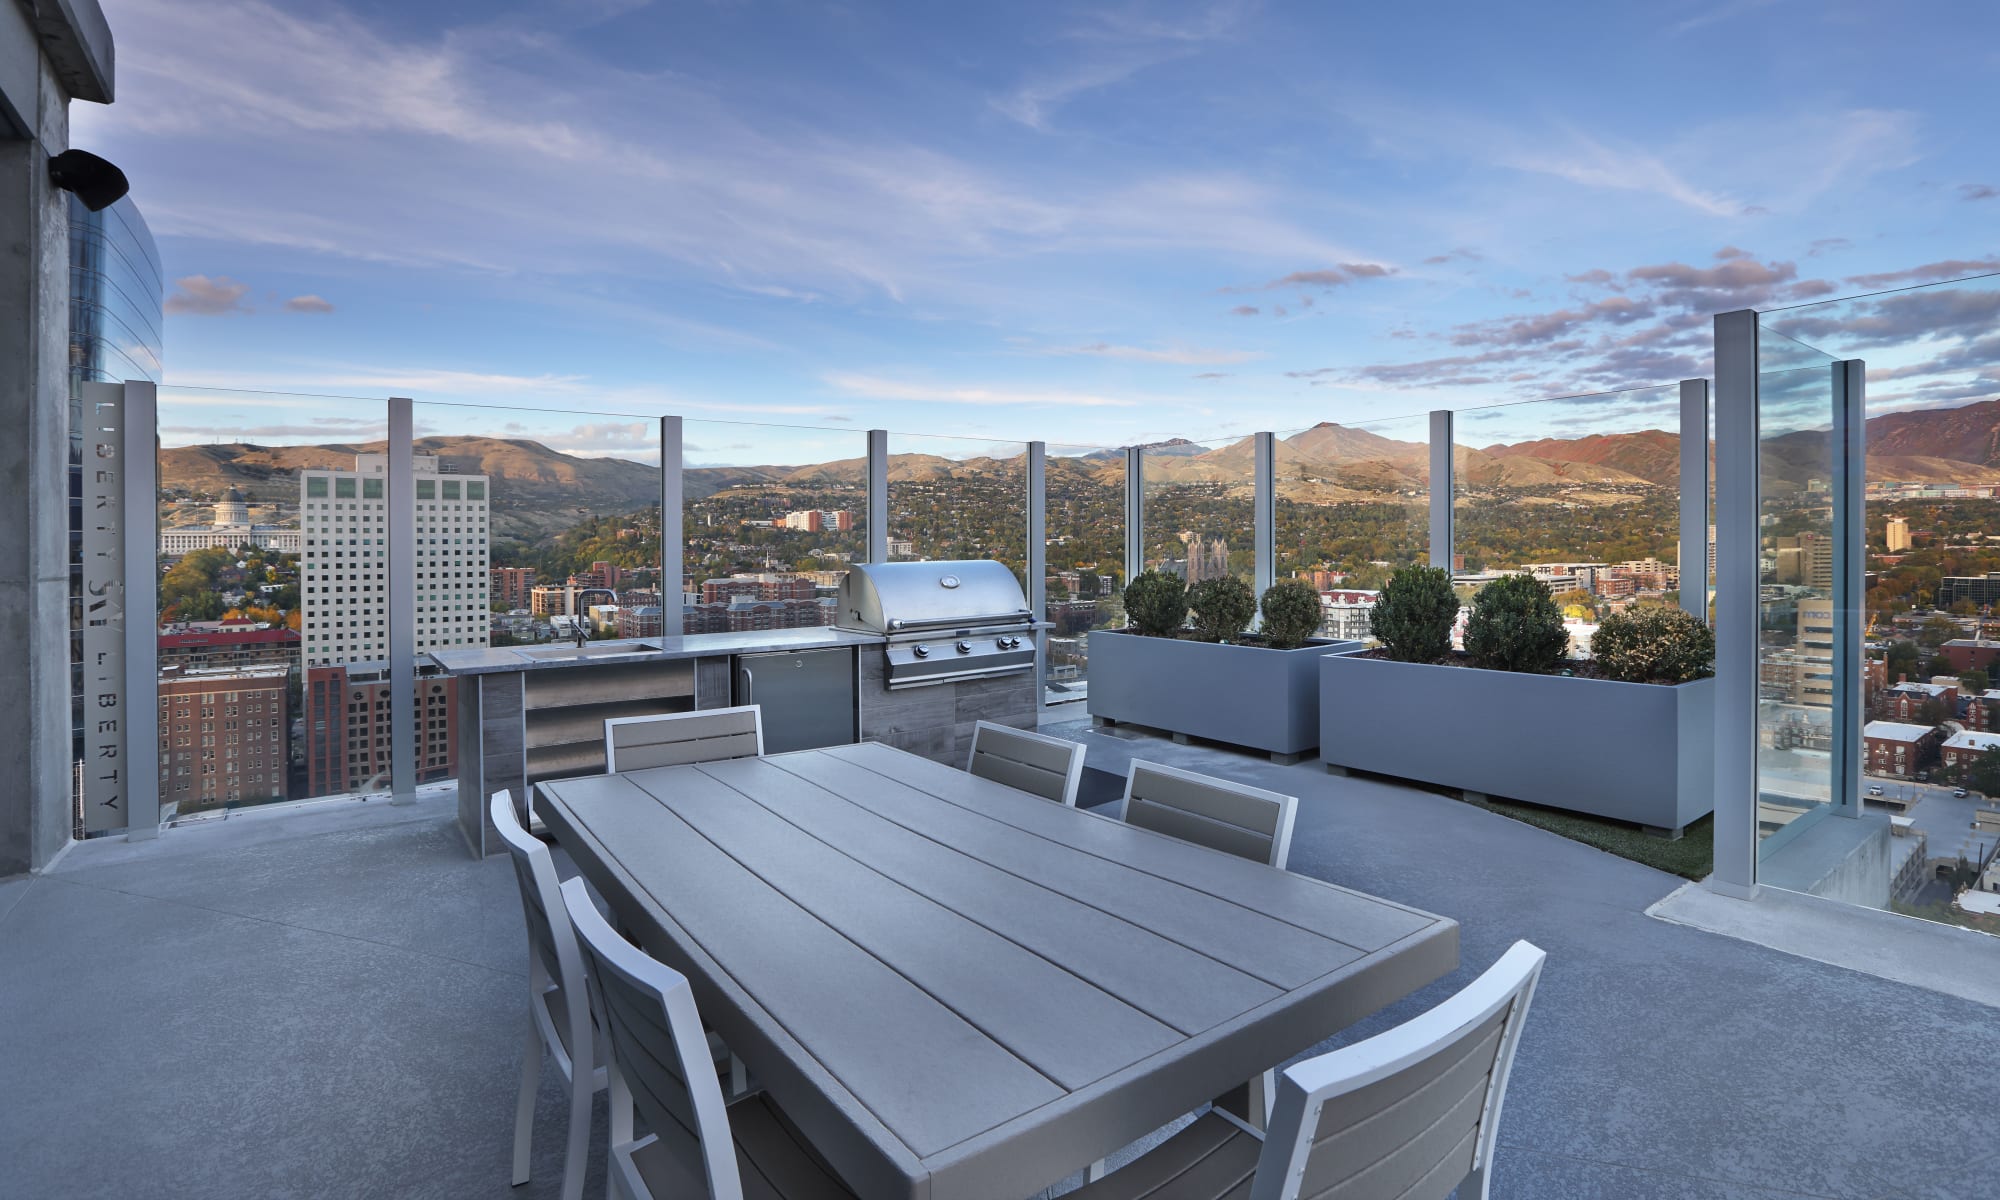 Patio with table and grill and mountain view at Luxury high-rise community of Liberty SKY in Salt Lake City, Utah